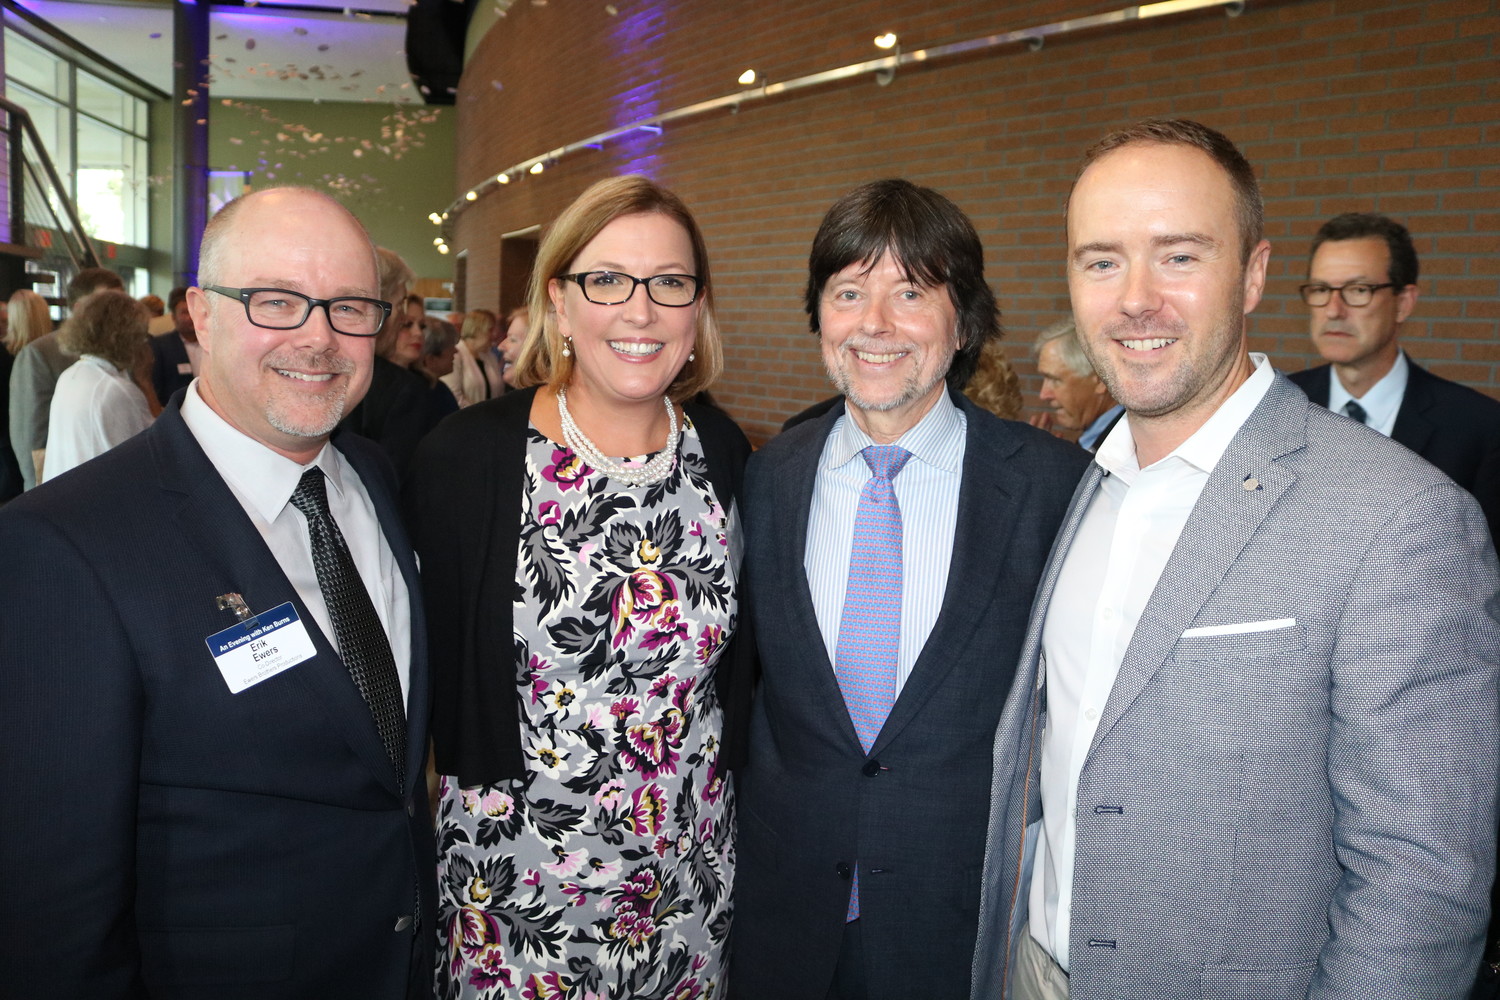 Erik Ewers, Julie Coffman, Ken Burns and Chris Ewers gather prior to the screening of “The Mayo Clinic: Faith – Hope – Science” at the University of North Florida’s Lazzara Performance Hall on Thursday, Sept. 13. Burns and the Ewers brothers directed the documentary, while Coffman produced it.